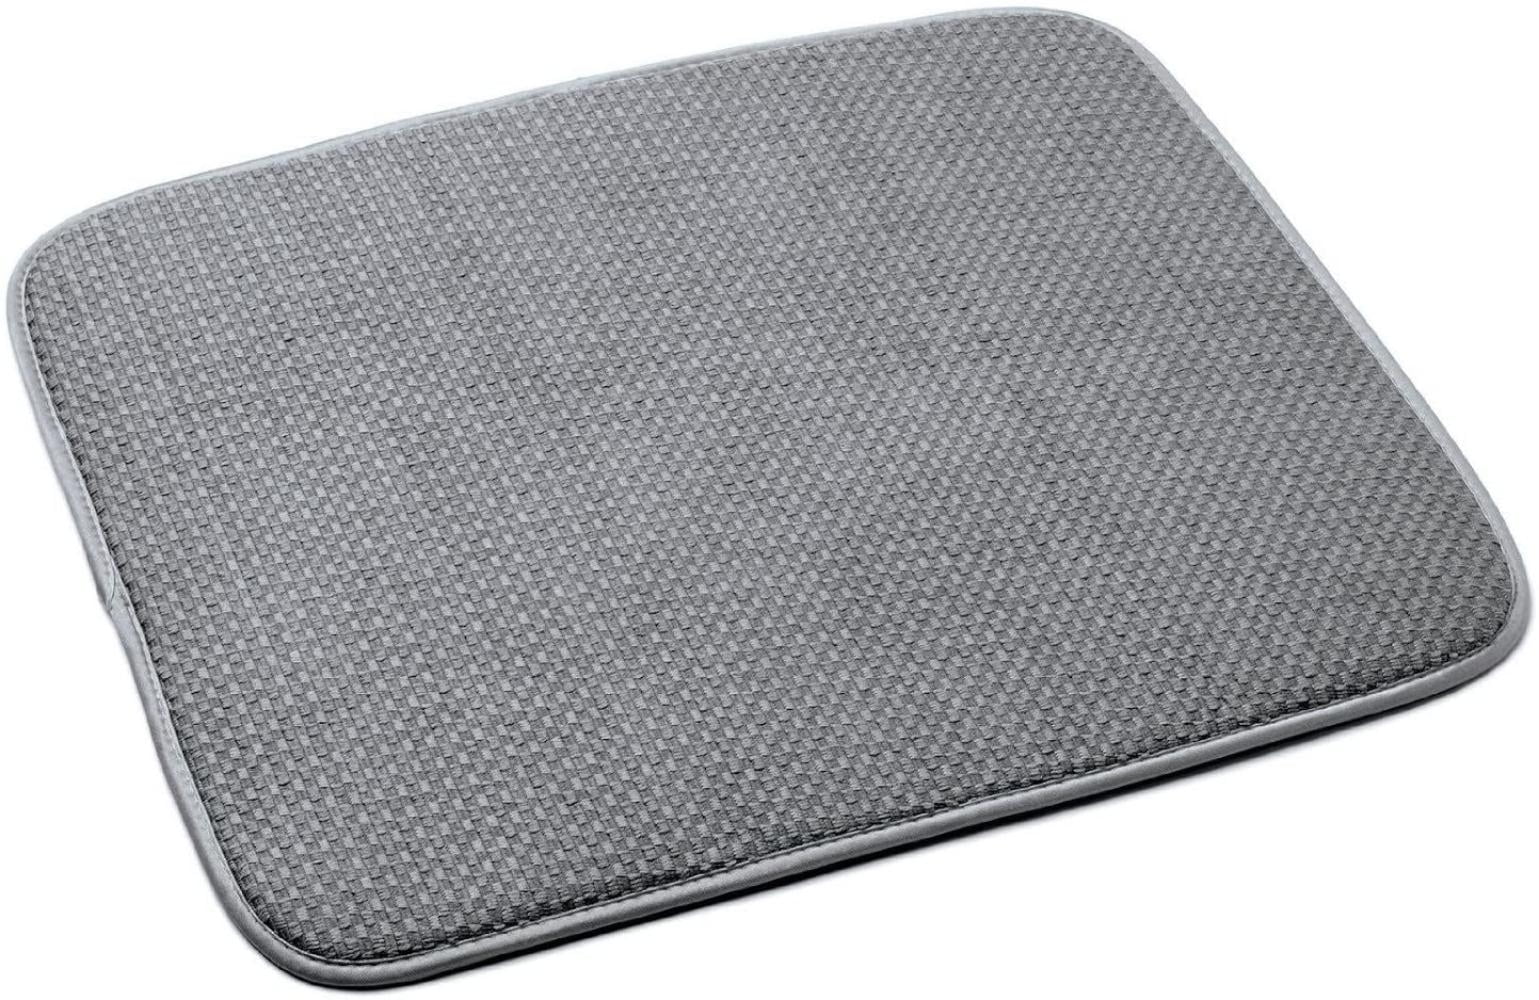 M-s Cloth Microfiber Dish Plate Drying Mats Kithcen Super Absorbent blue 16inch X 18inch